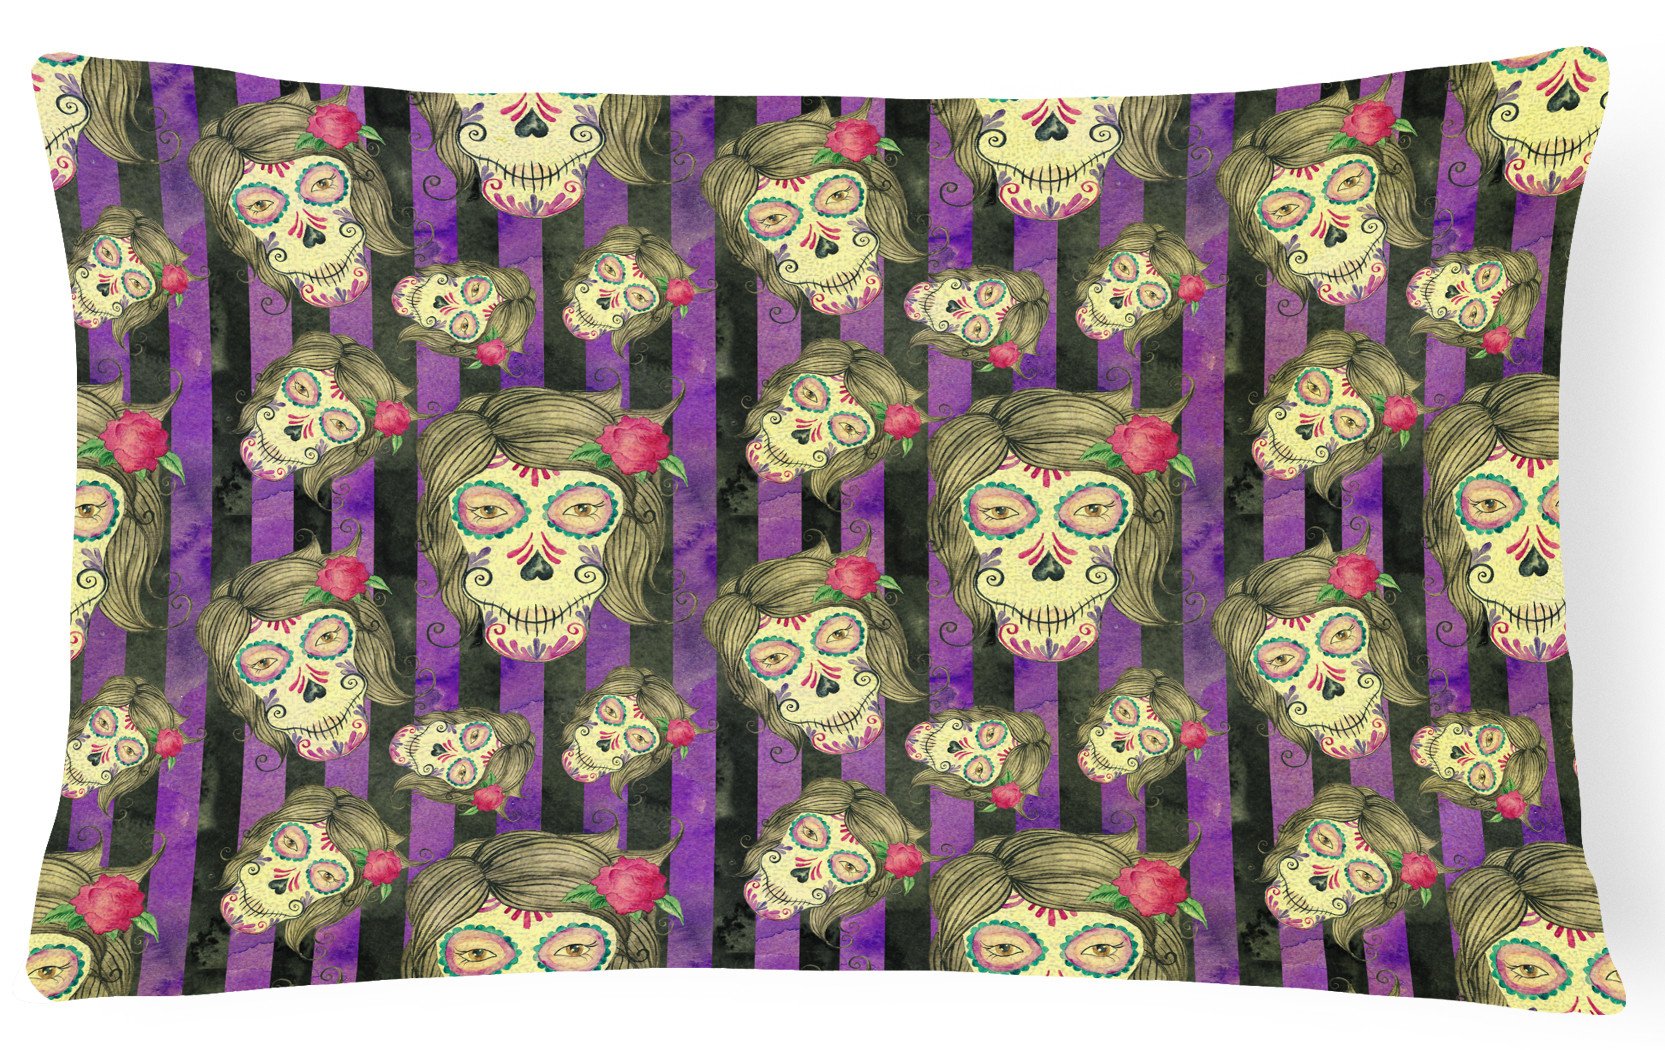 Watecolor Day of the Dead Halloween Canvas Fabric Decorative Pillow BB7519PW1216 by Caroline's Treasures